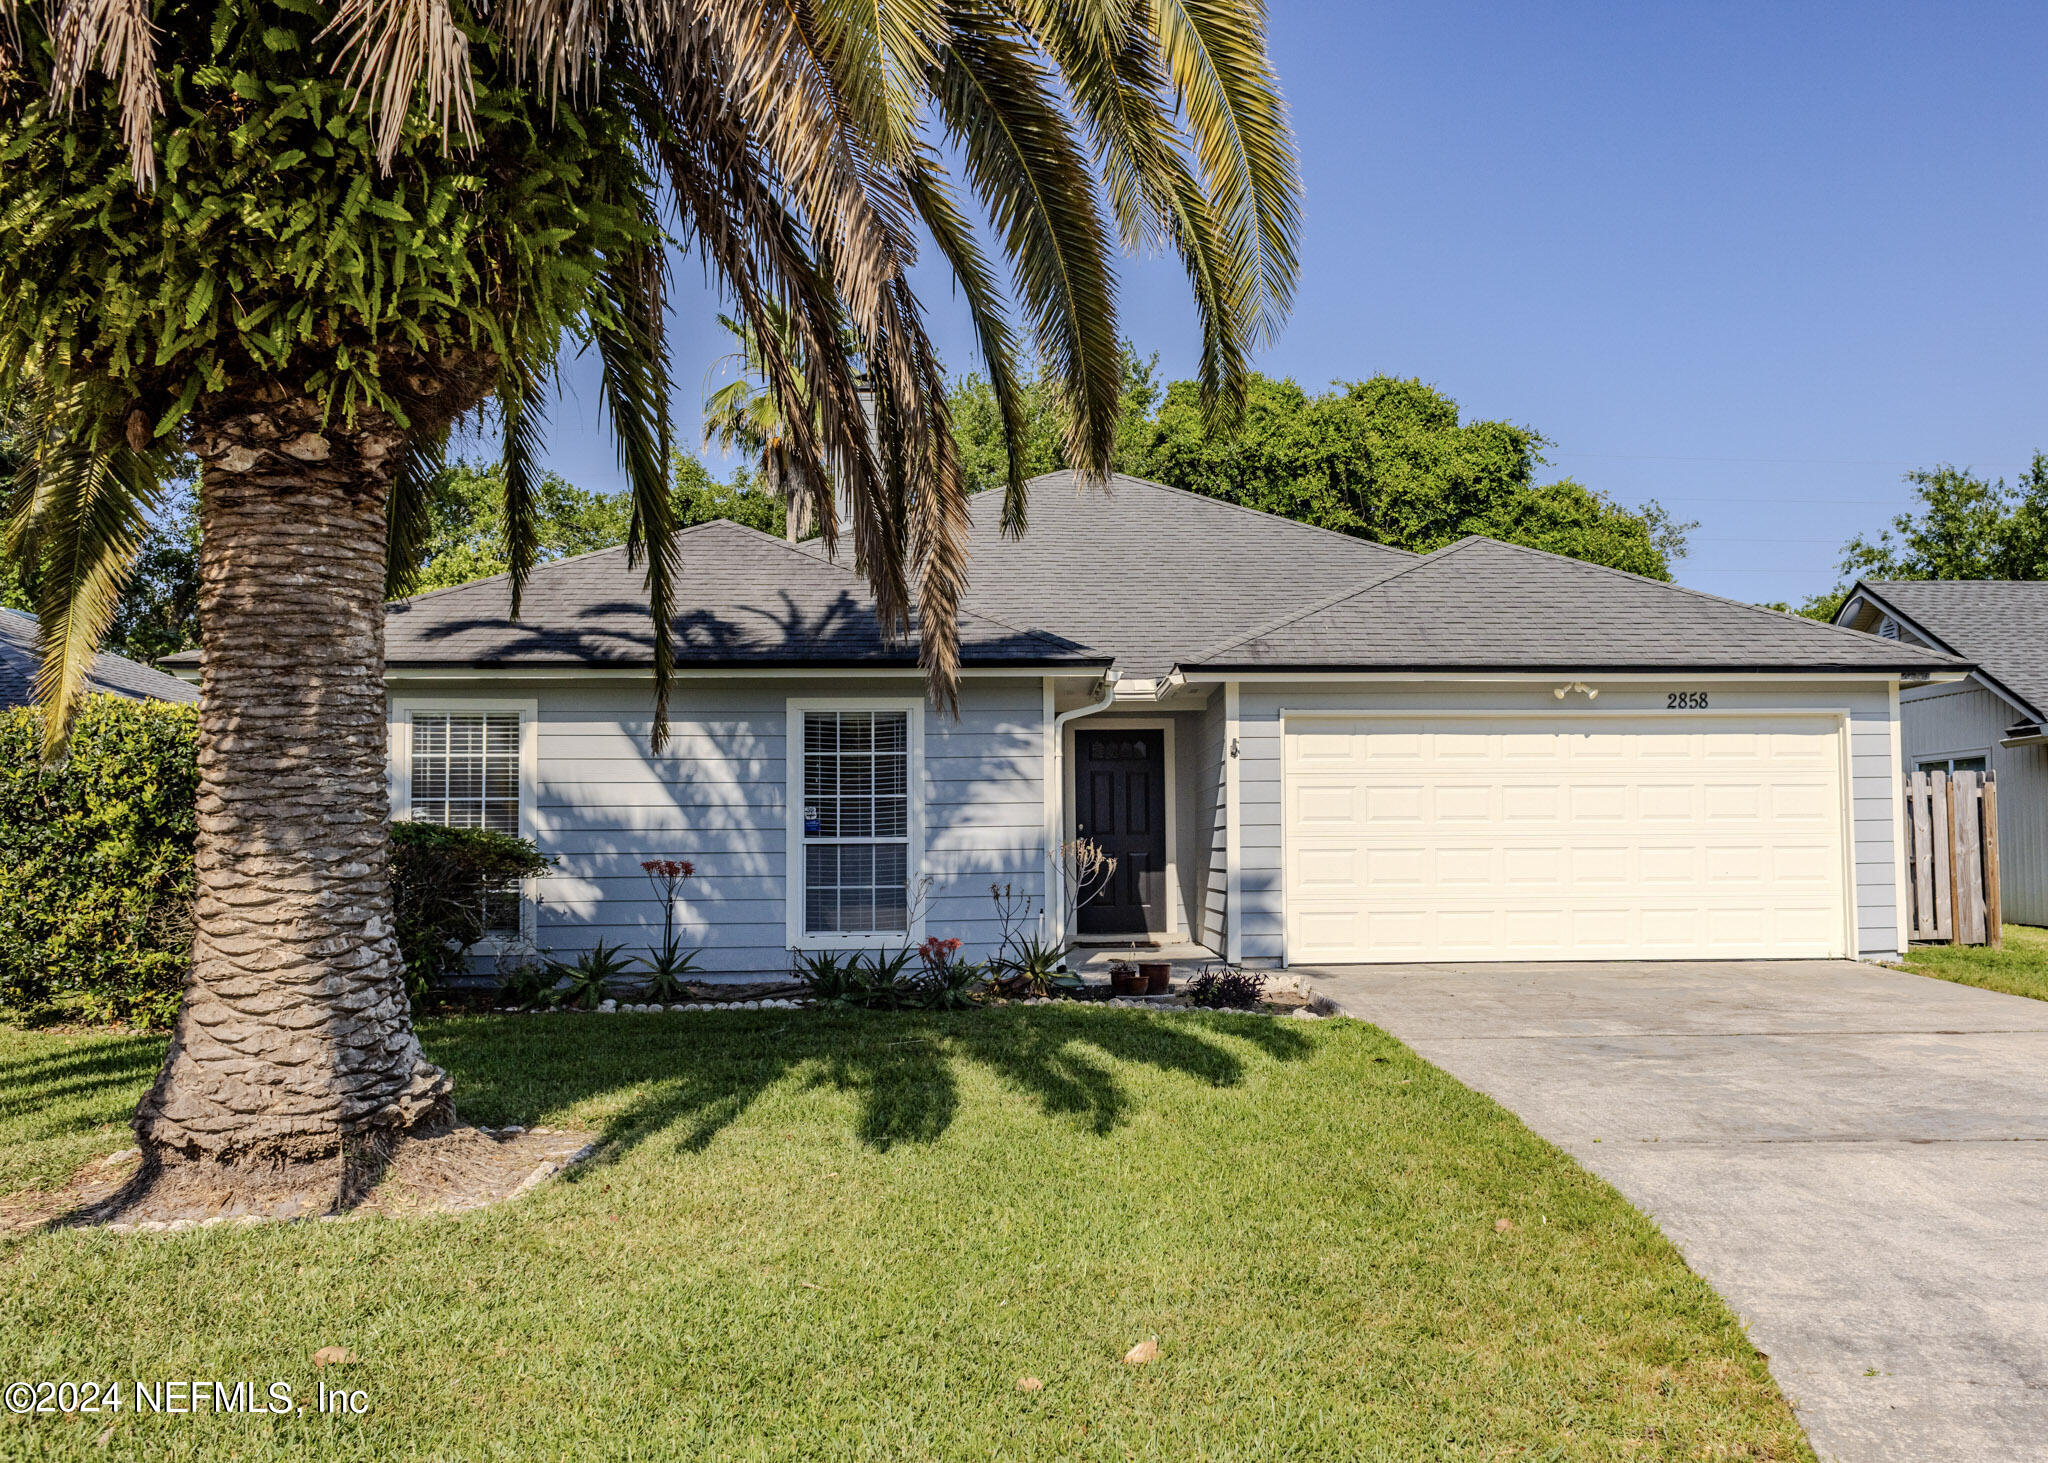 Jacksonville, FL home for sale located at 2858 Canyon Falls Drive, Jacksonville, FL 32224